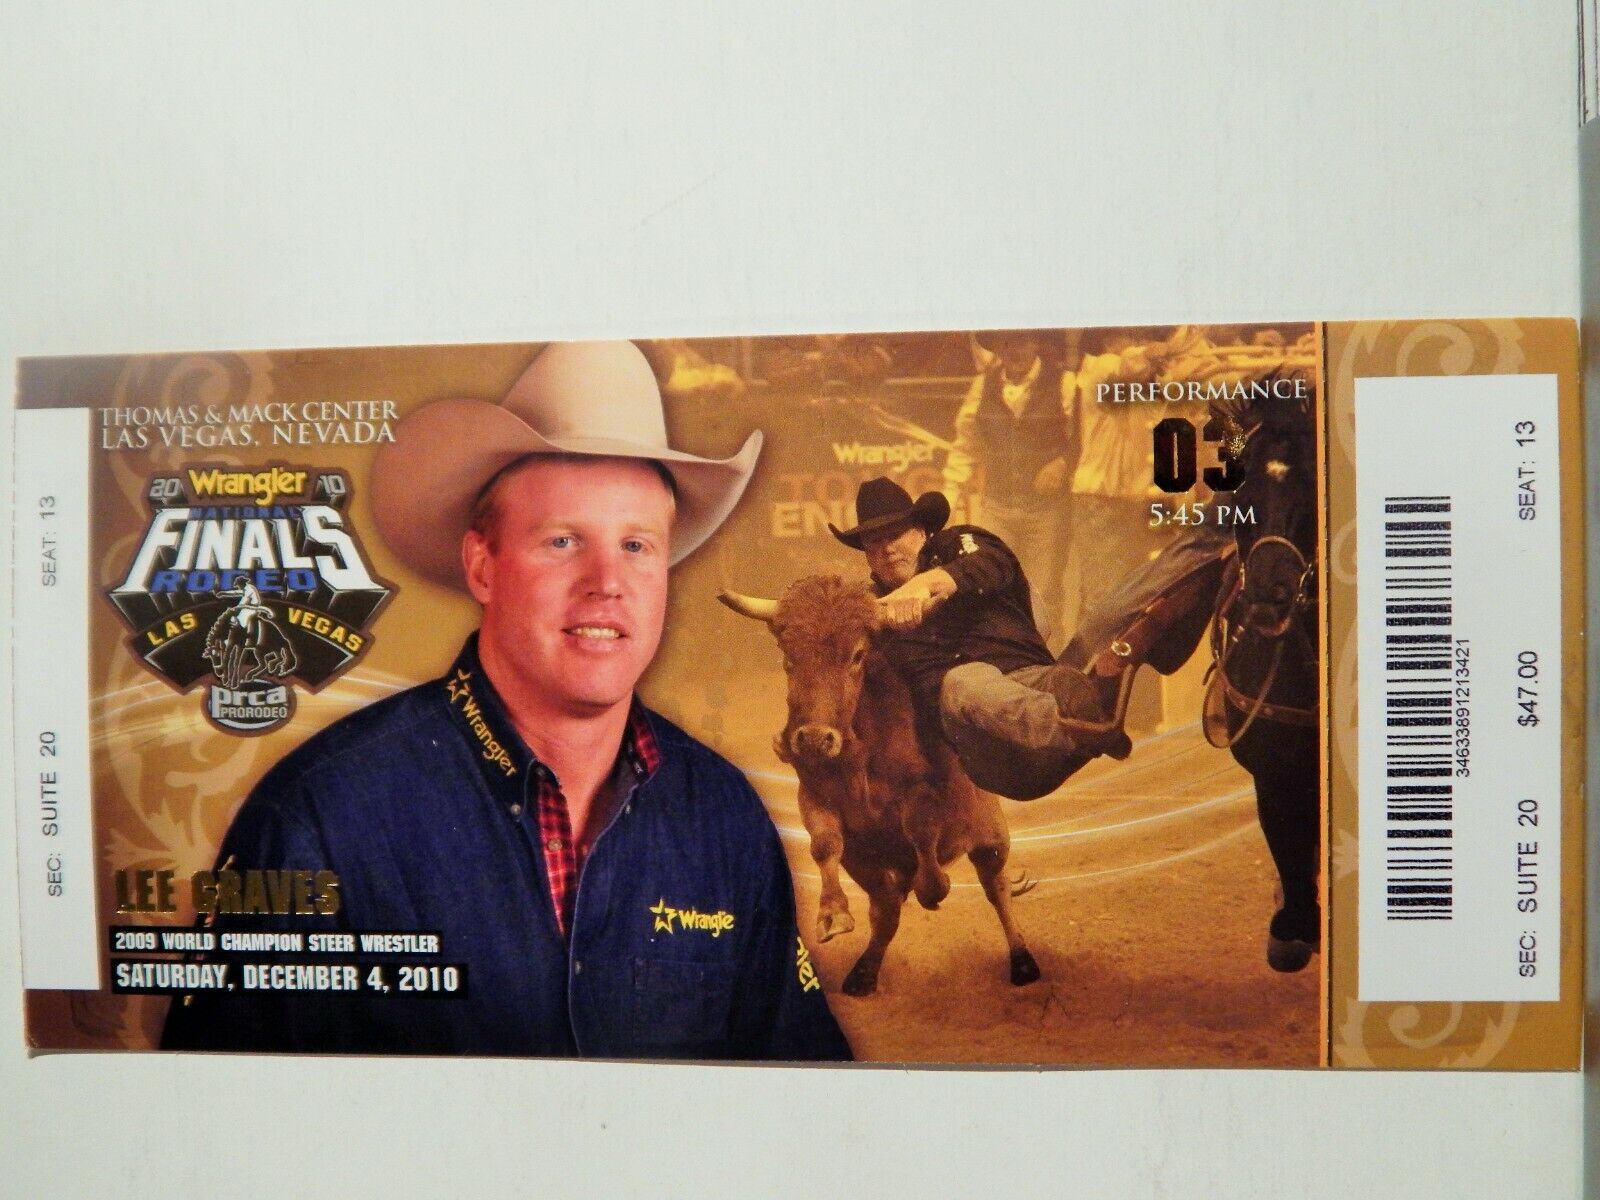 2010 NATIONAL FINALS RODEO LG ORIGINAL USED TICKET LEE GRAVES COLOR Photo Poster painting